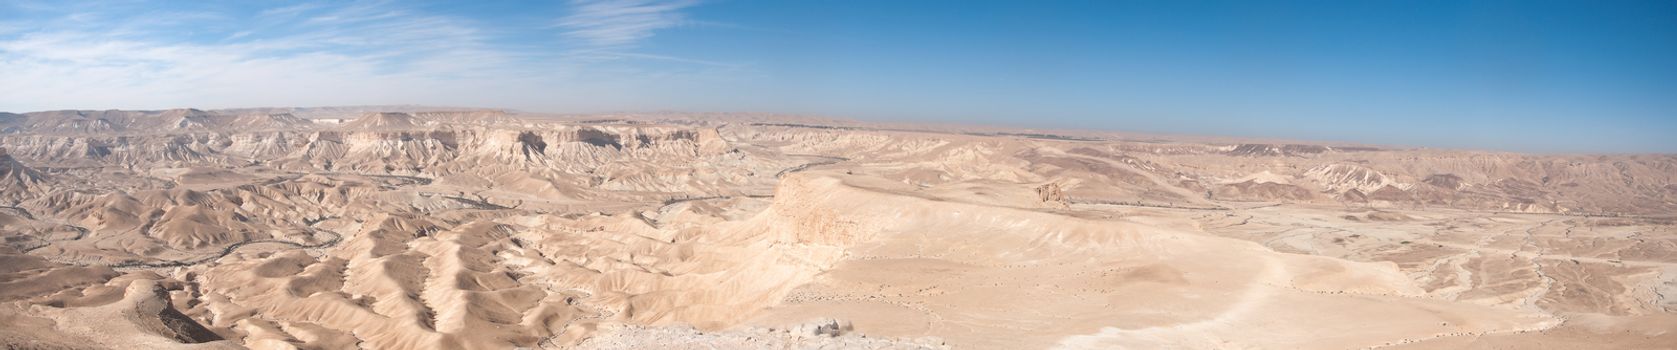 Tourism in stone desert and hiking to mountains of Israel